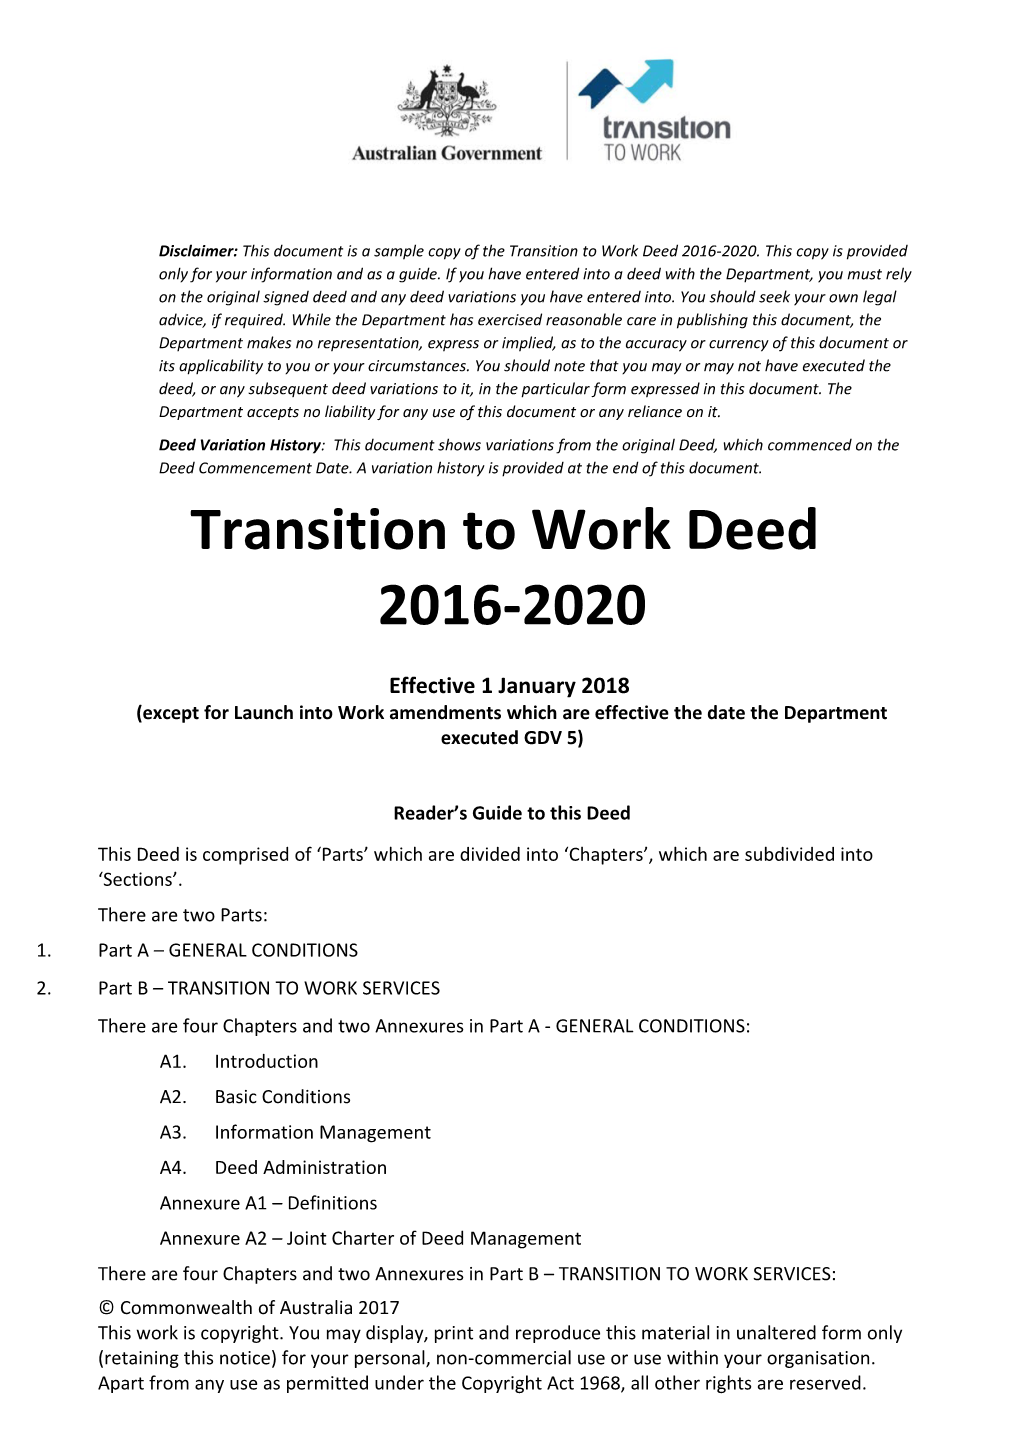 Transition to Work Deed